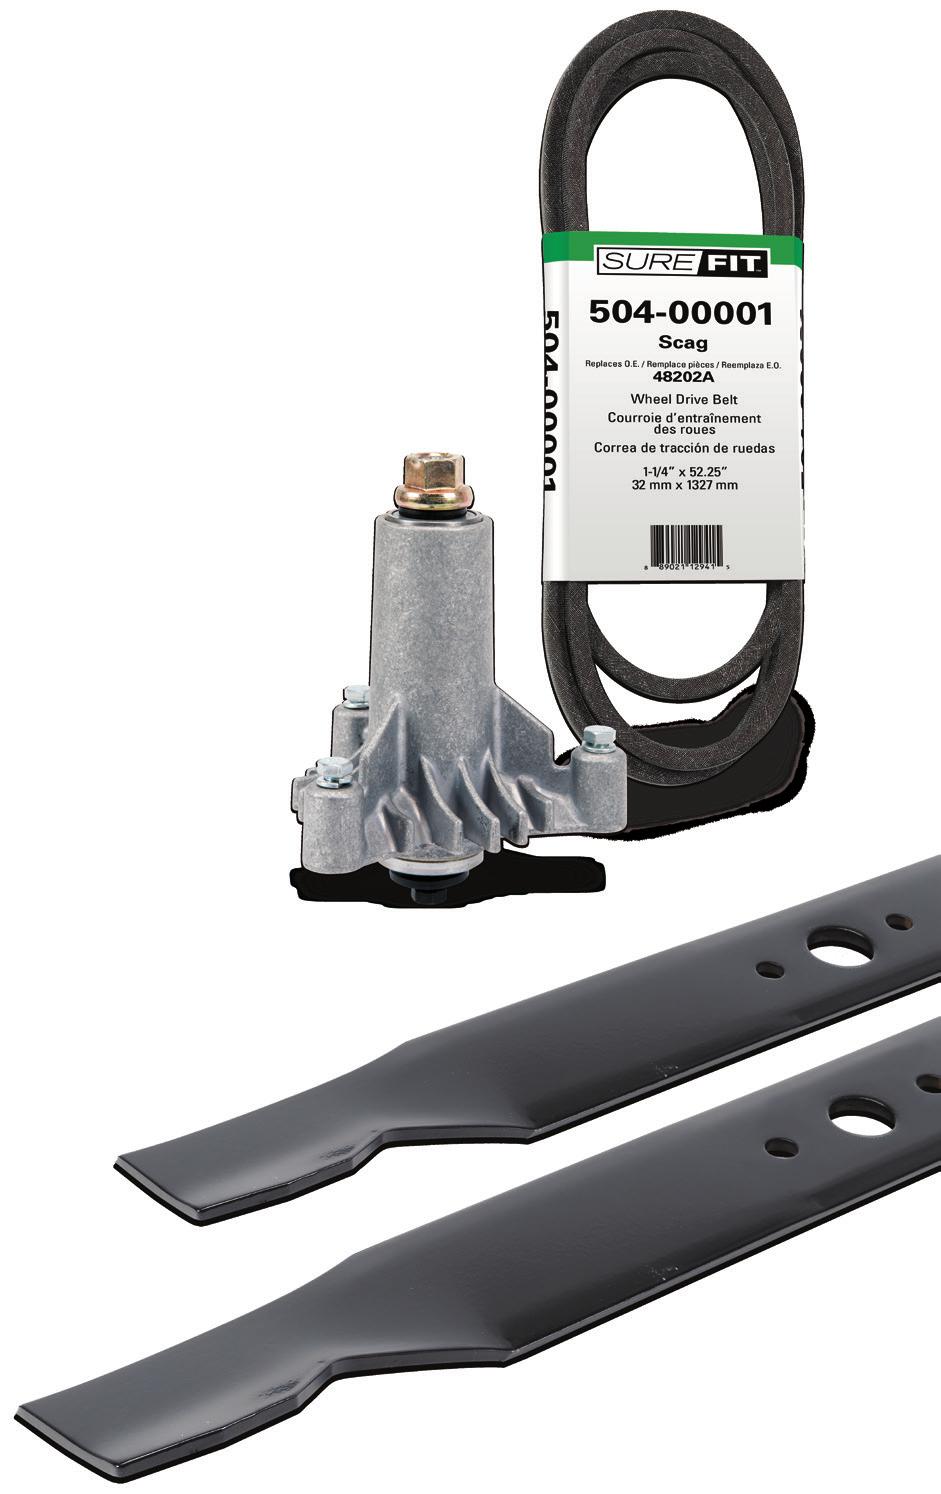 SureFit is the perfect complement to your OEM parts, offering OEM-equivalent replacement parts, at a competitive price, from a single reliable source.